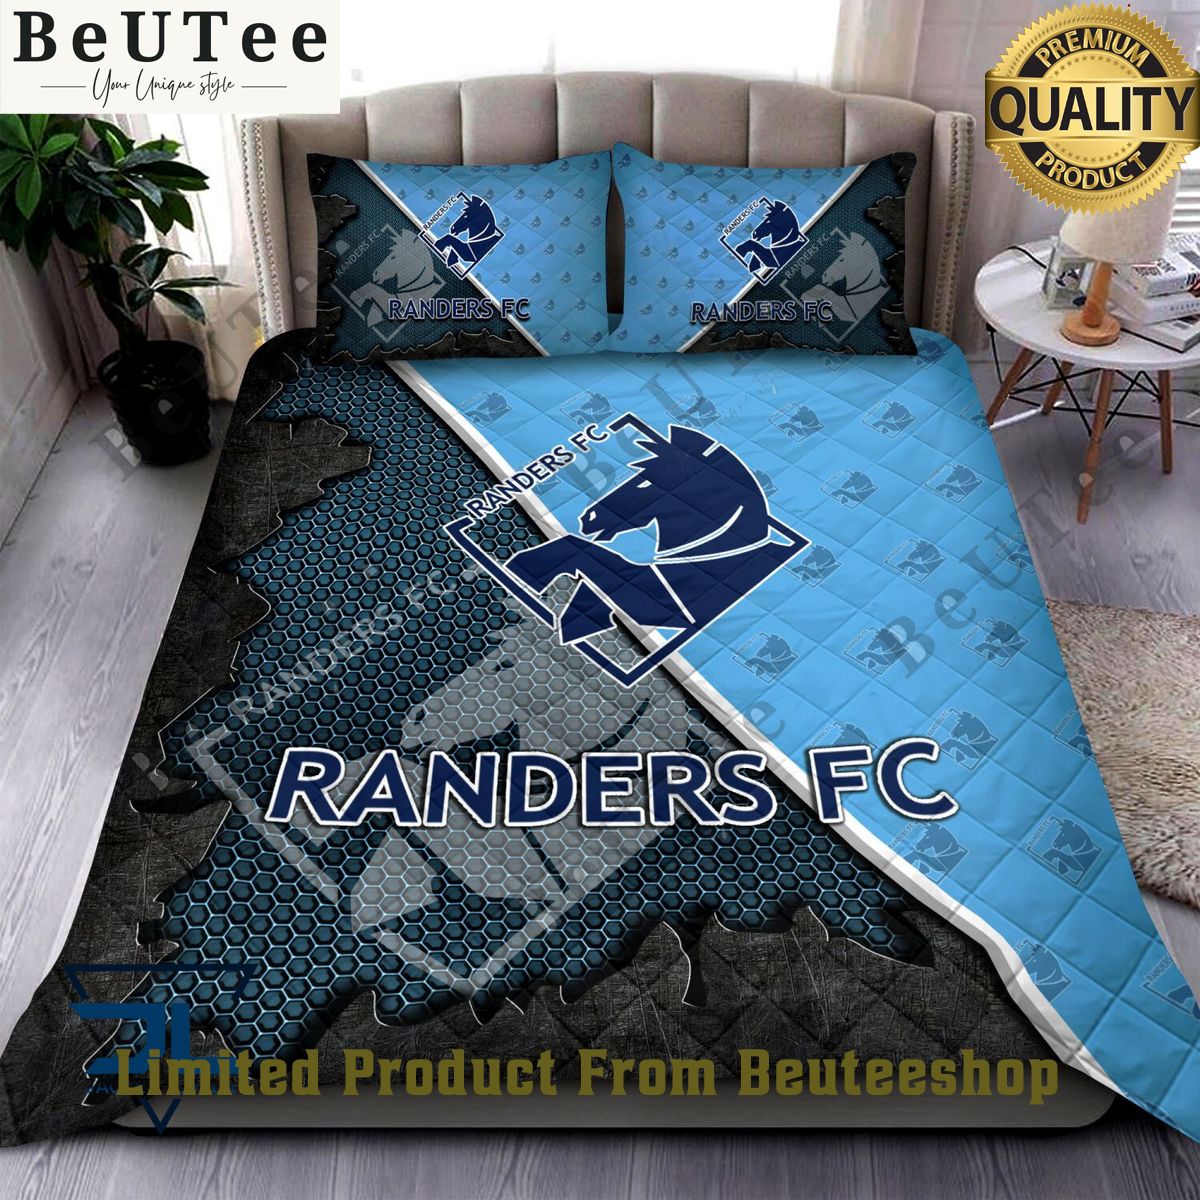 Randers FC Superliga Quilt Broken Bedding Set This is awesome and unique